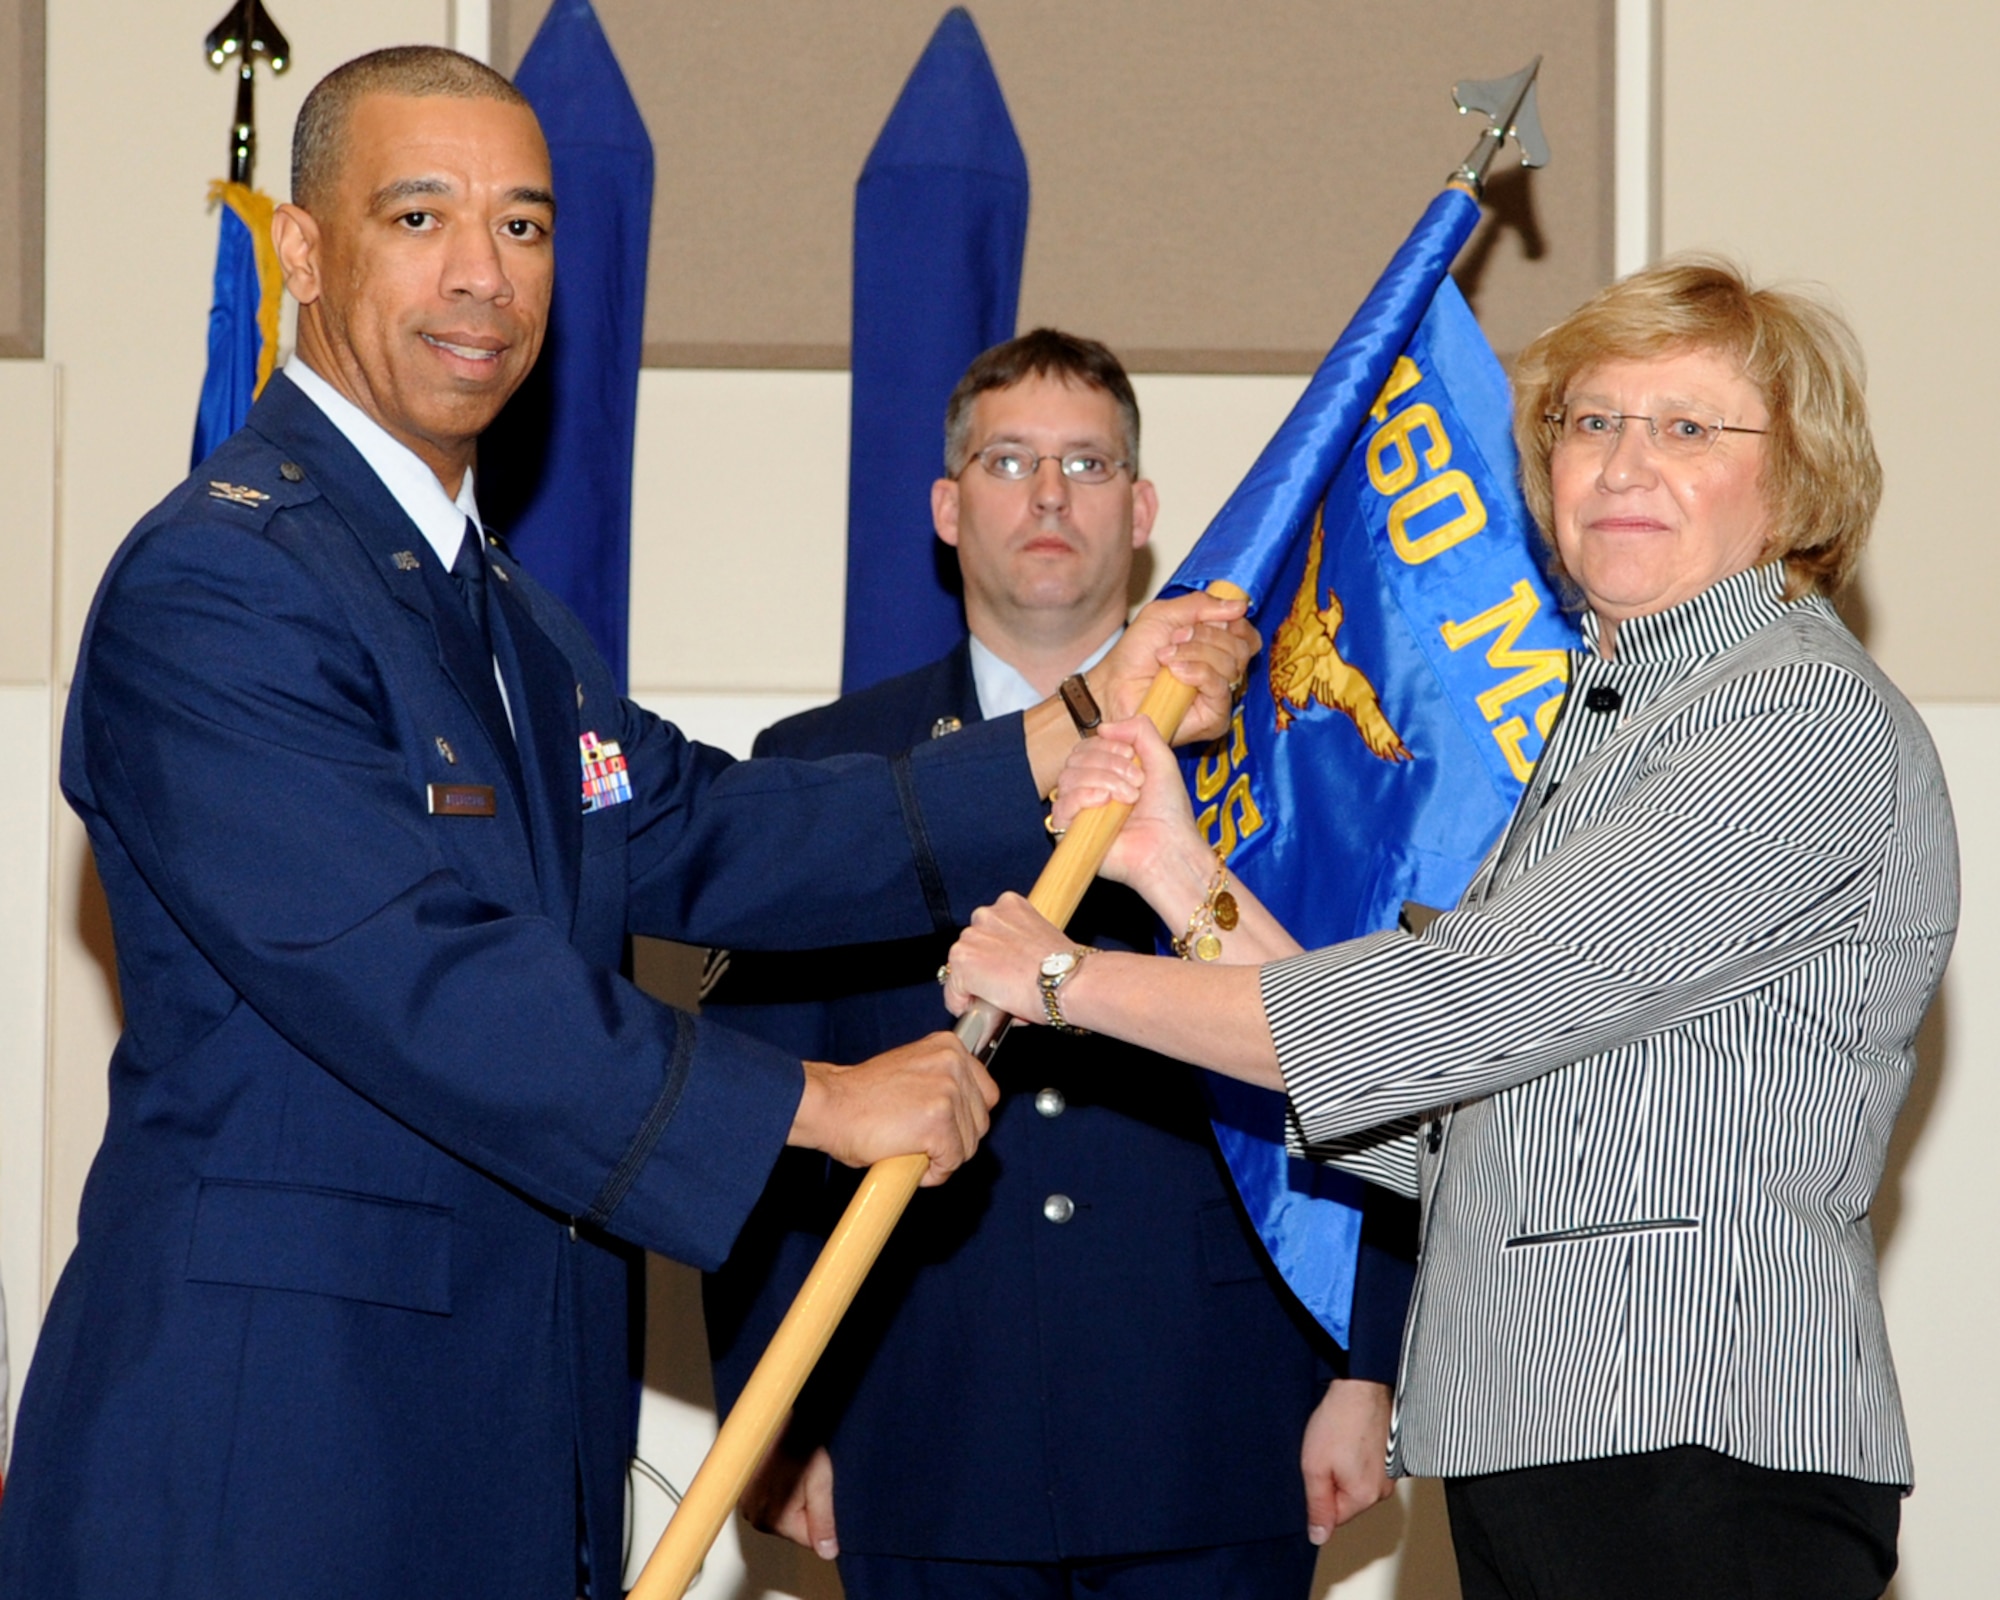 BUCKLEY AIR FORCE BASE, Colo. -- Col. Vincent Jefferson, 460th Mission Support Group Commander, hands the Force Support Squadron guidon to Birgit Baldwin, FSS Director, during the Squadron's stand up ceremony March 17 at the Leadership Development Center. The 460th Services Division has merged with the 460th MSS to form the 460th FSS. (U.S. Air Force photo by Senior Airman Erika Brooke)